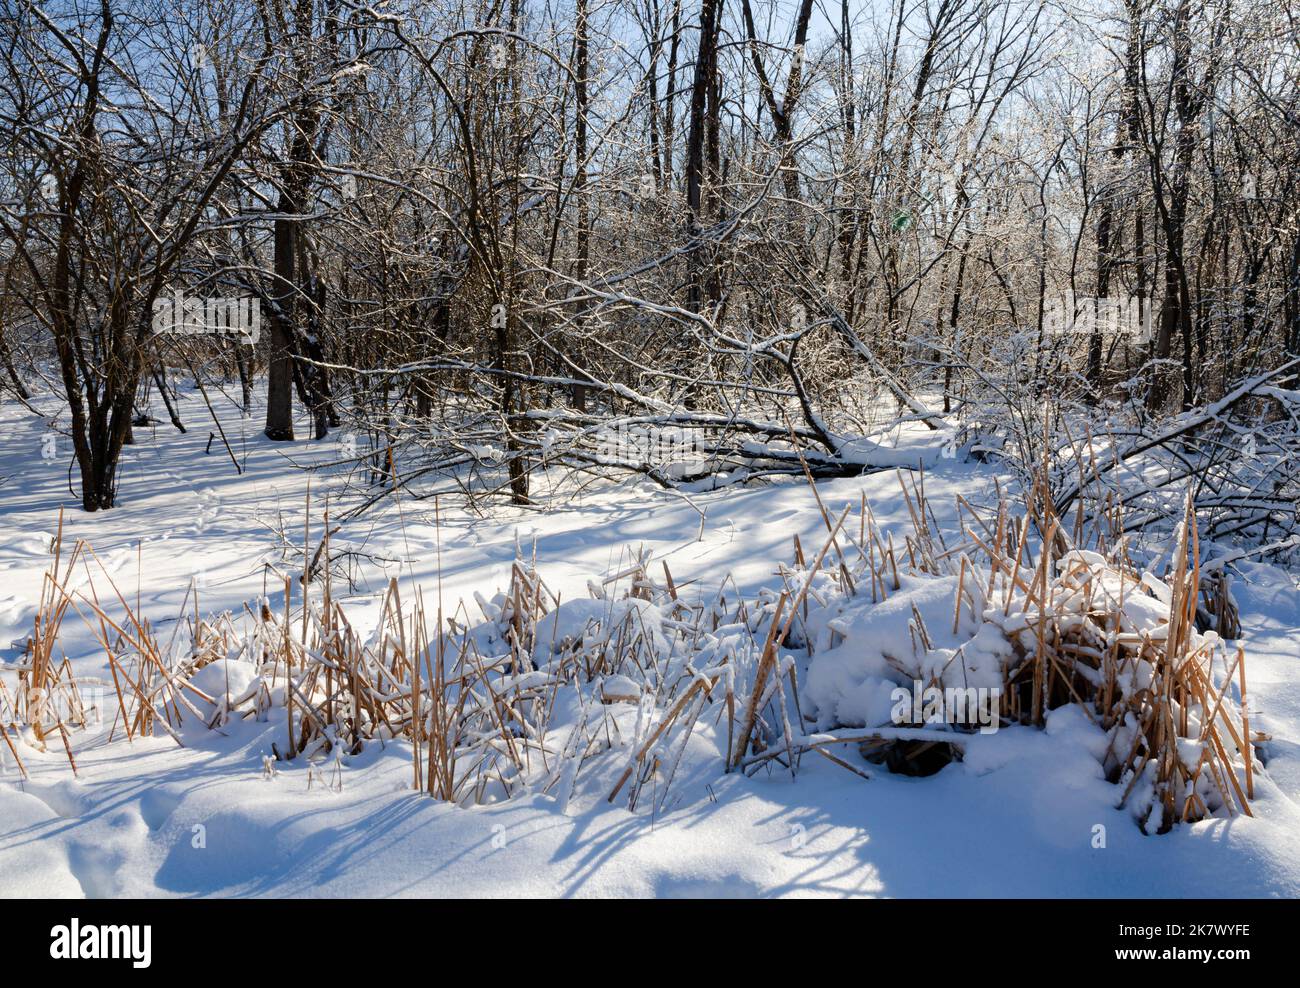 Remnants of cattail reeds are snow covered against a backlit forest after a recent snow, Hammel Woods Forest Preserve, Will County, Illinois Stock Photo